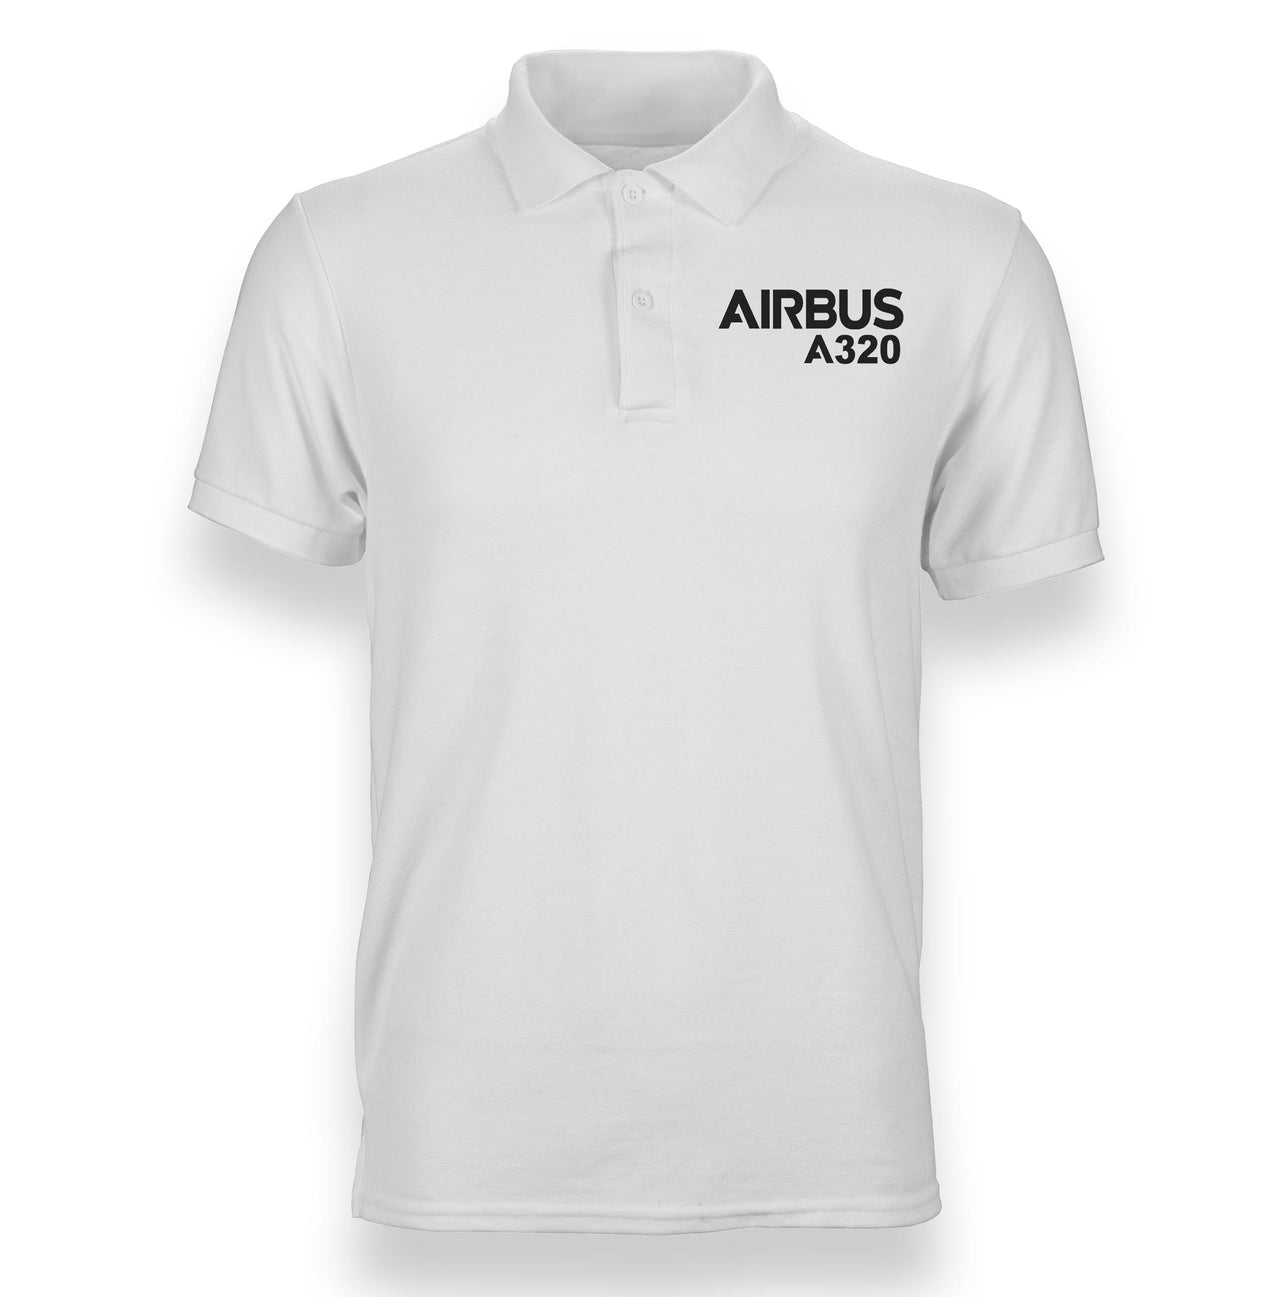 Airbus A320 & Text Designed Polo T-Shirts